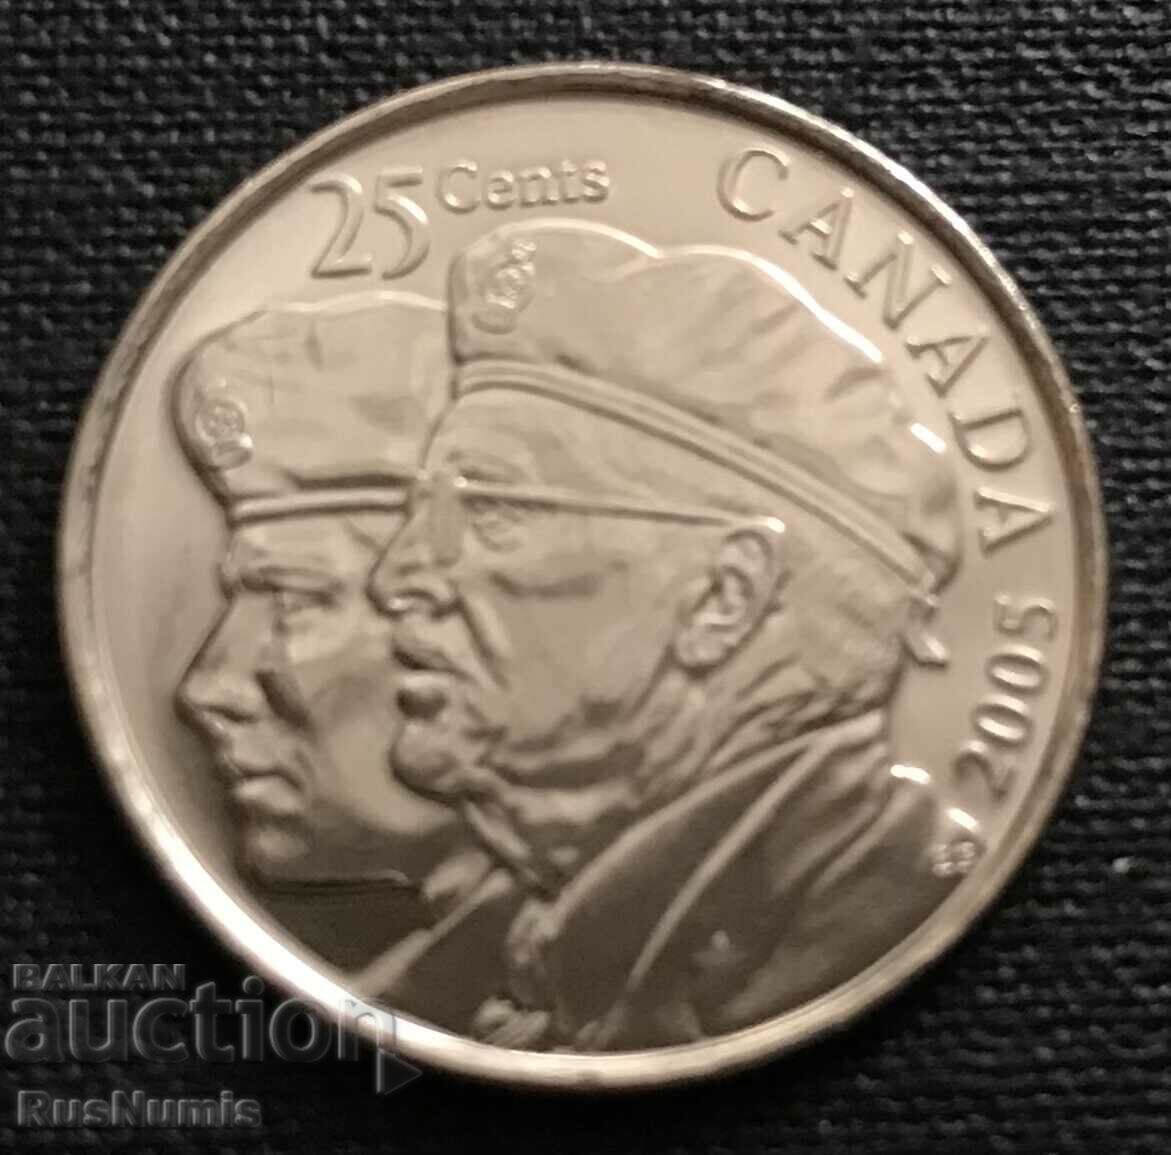 Canada. 25 cents 2005 Year of the Veteran.UNC.